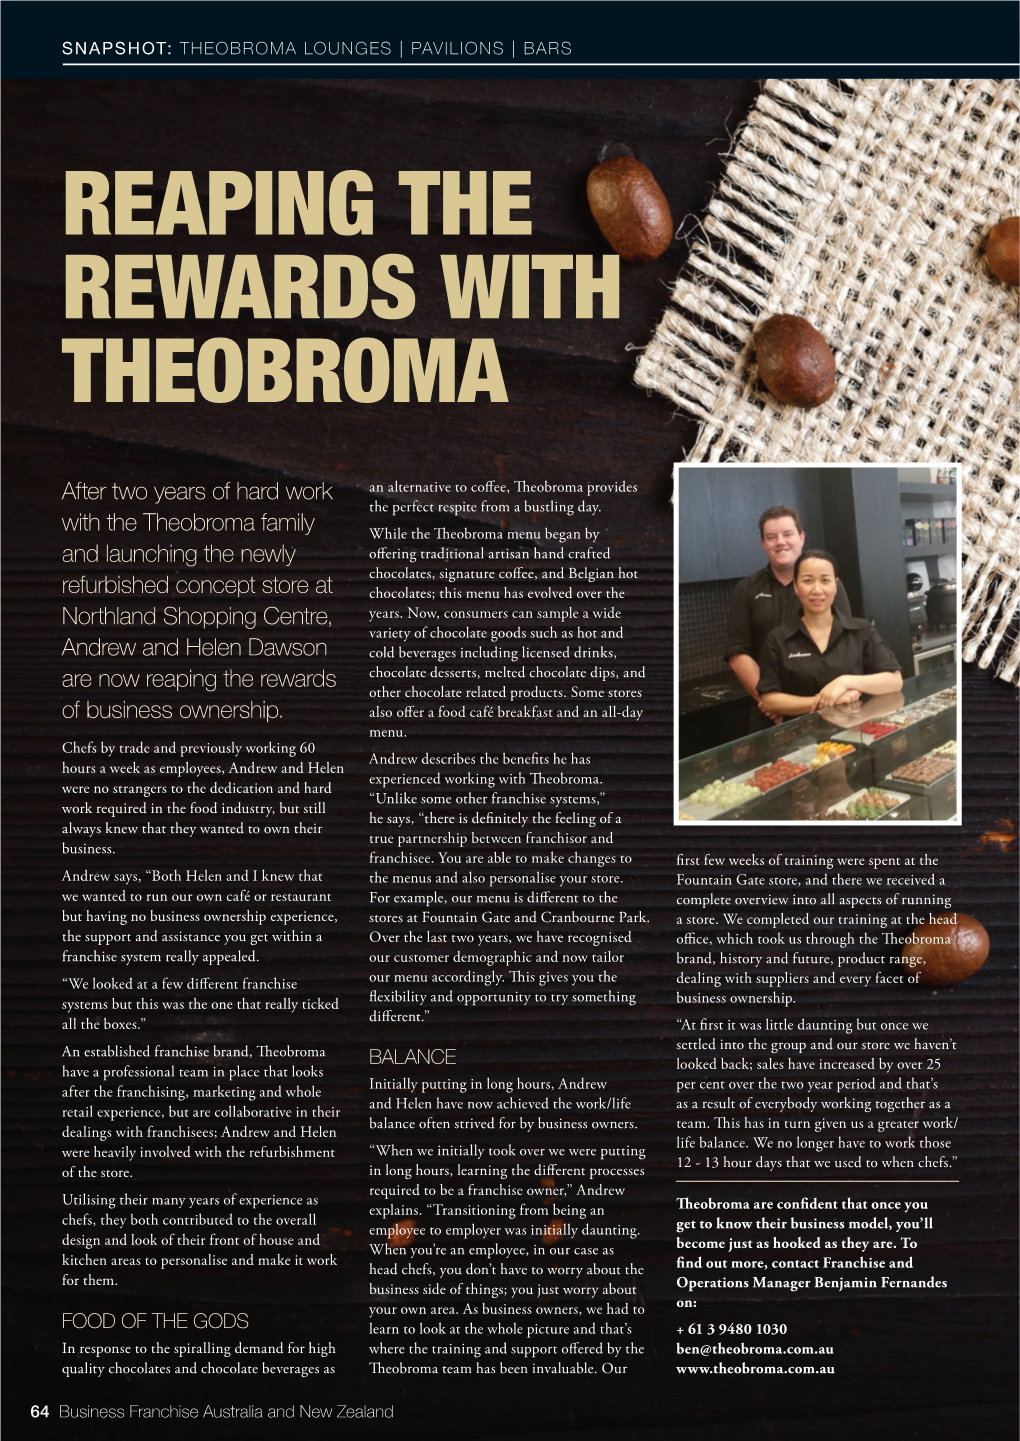 Reaping the Rewards with Theobroma